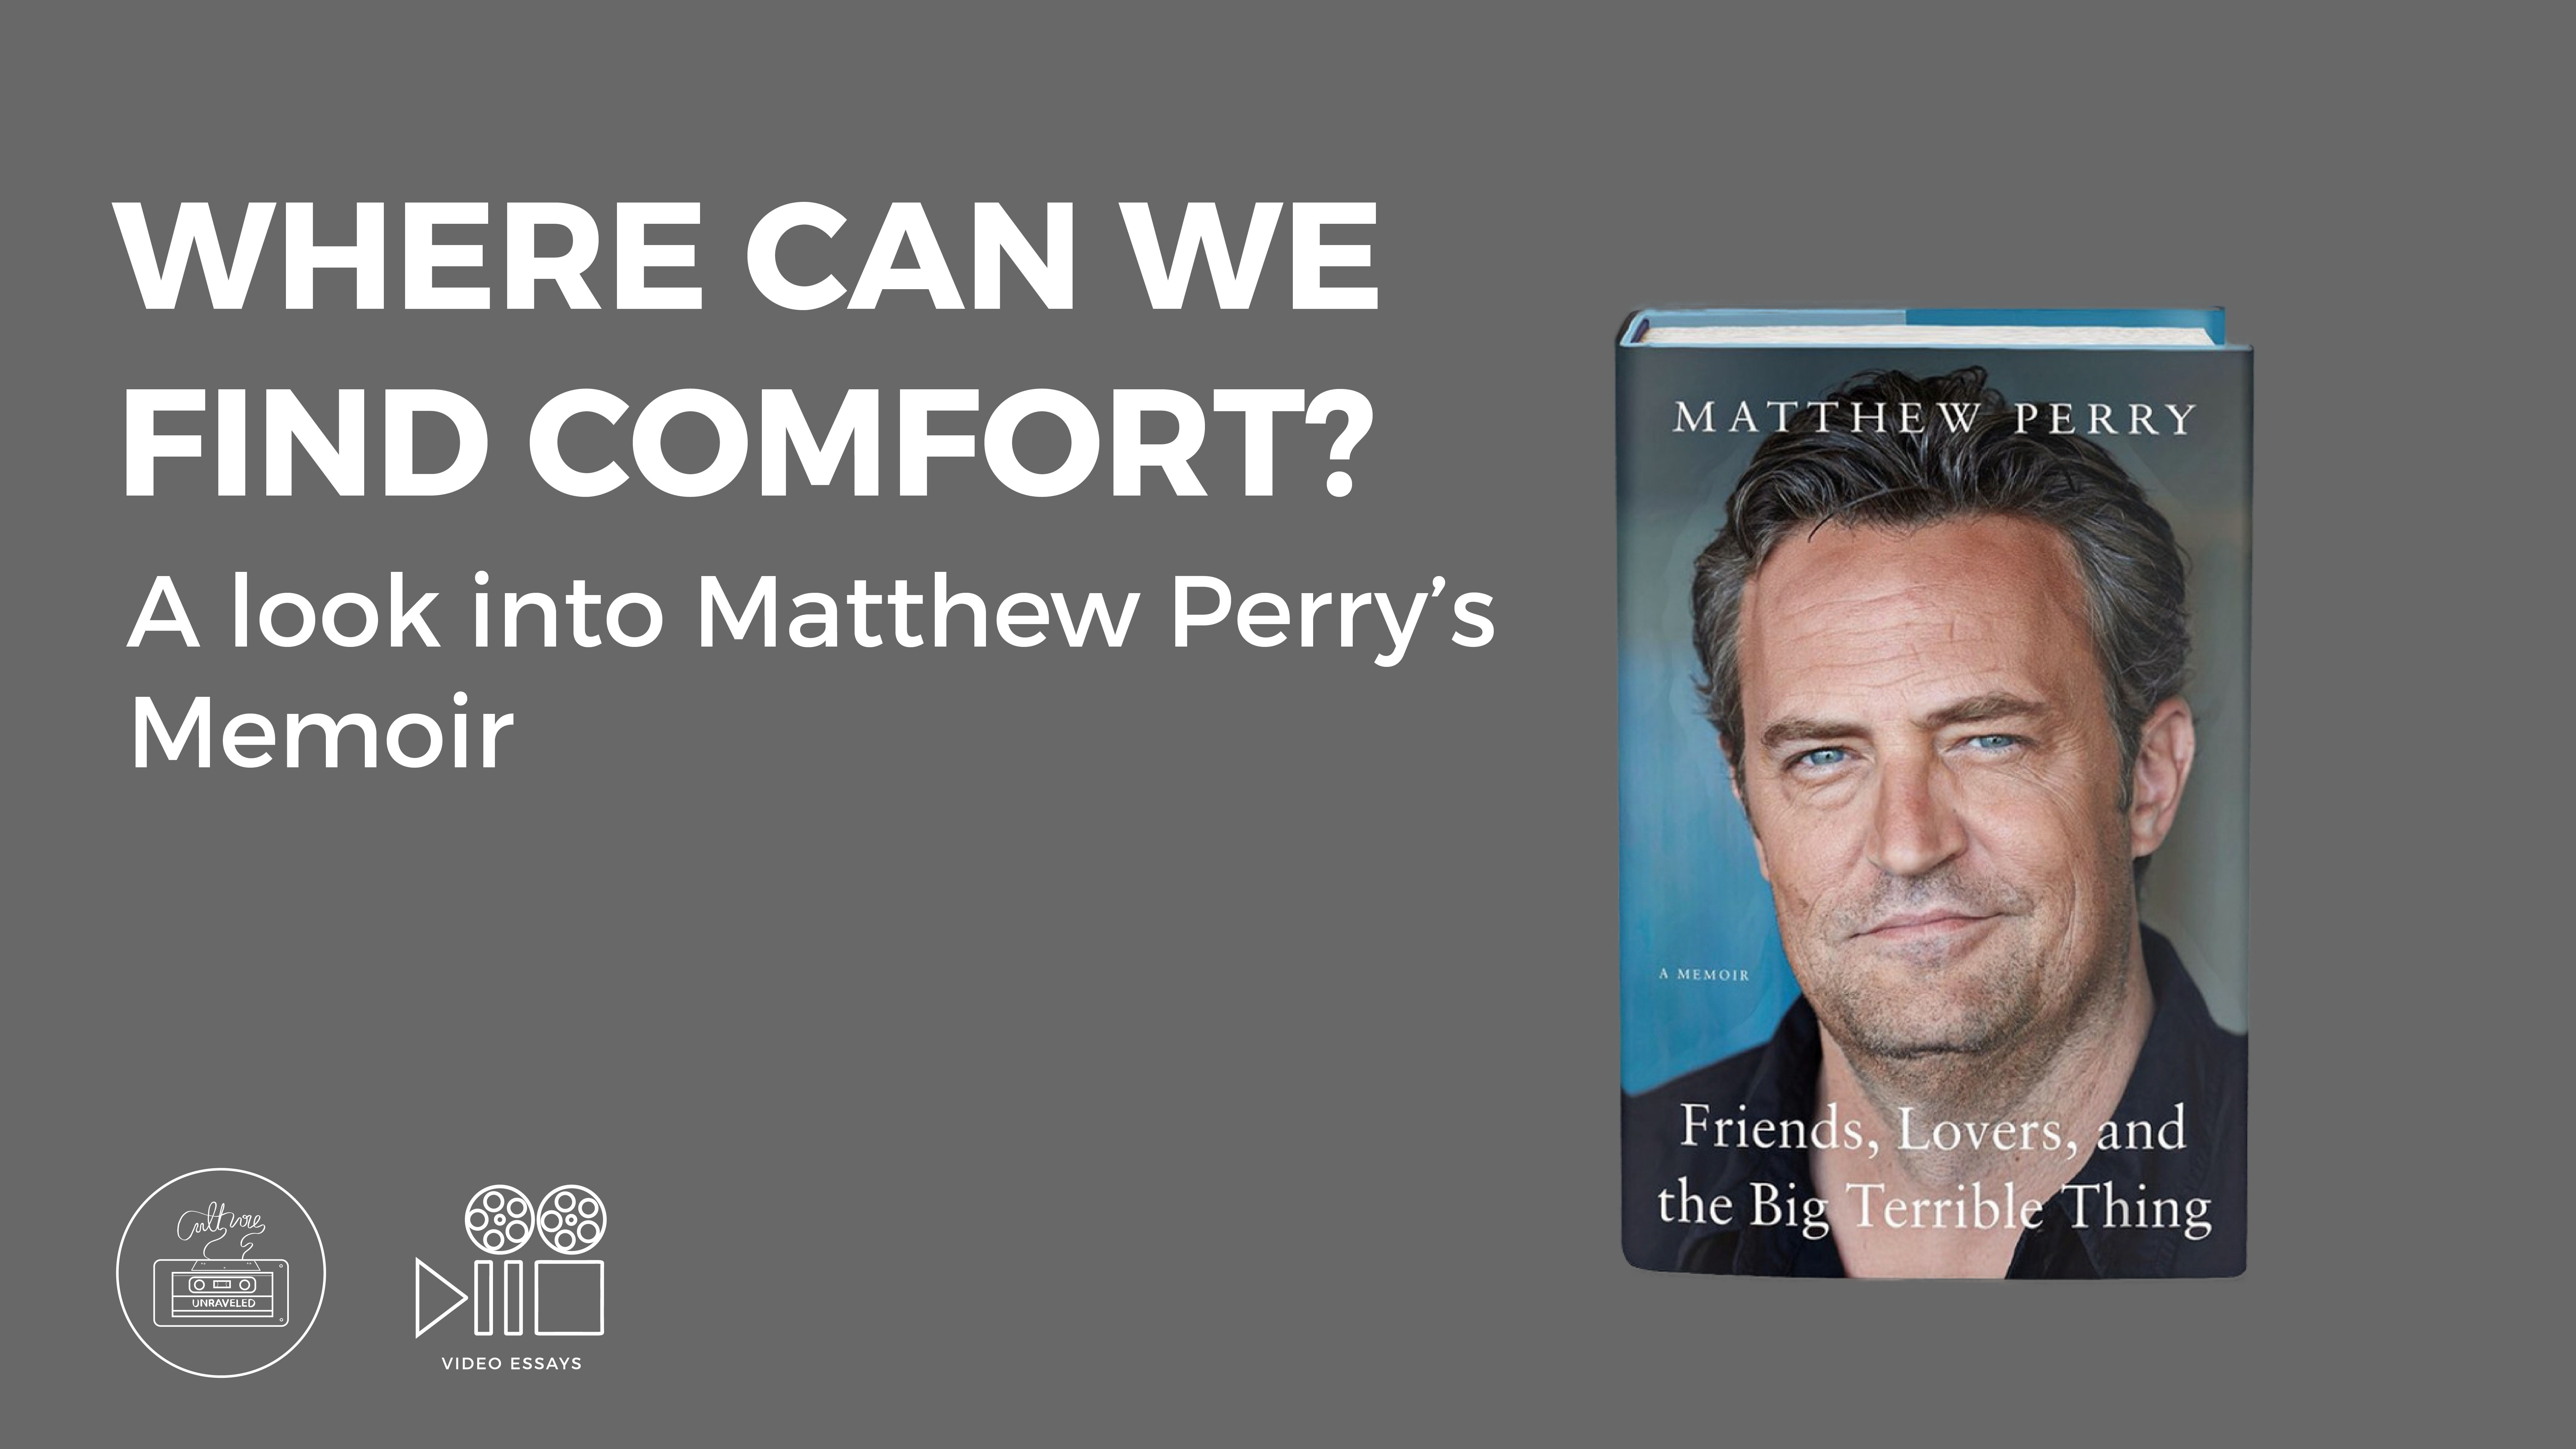 Where Can We Find Comfort? A look into Matthew Perry’s Memoir